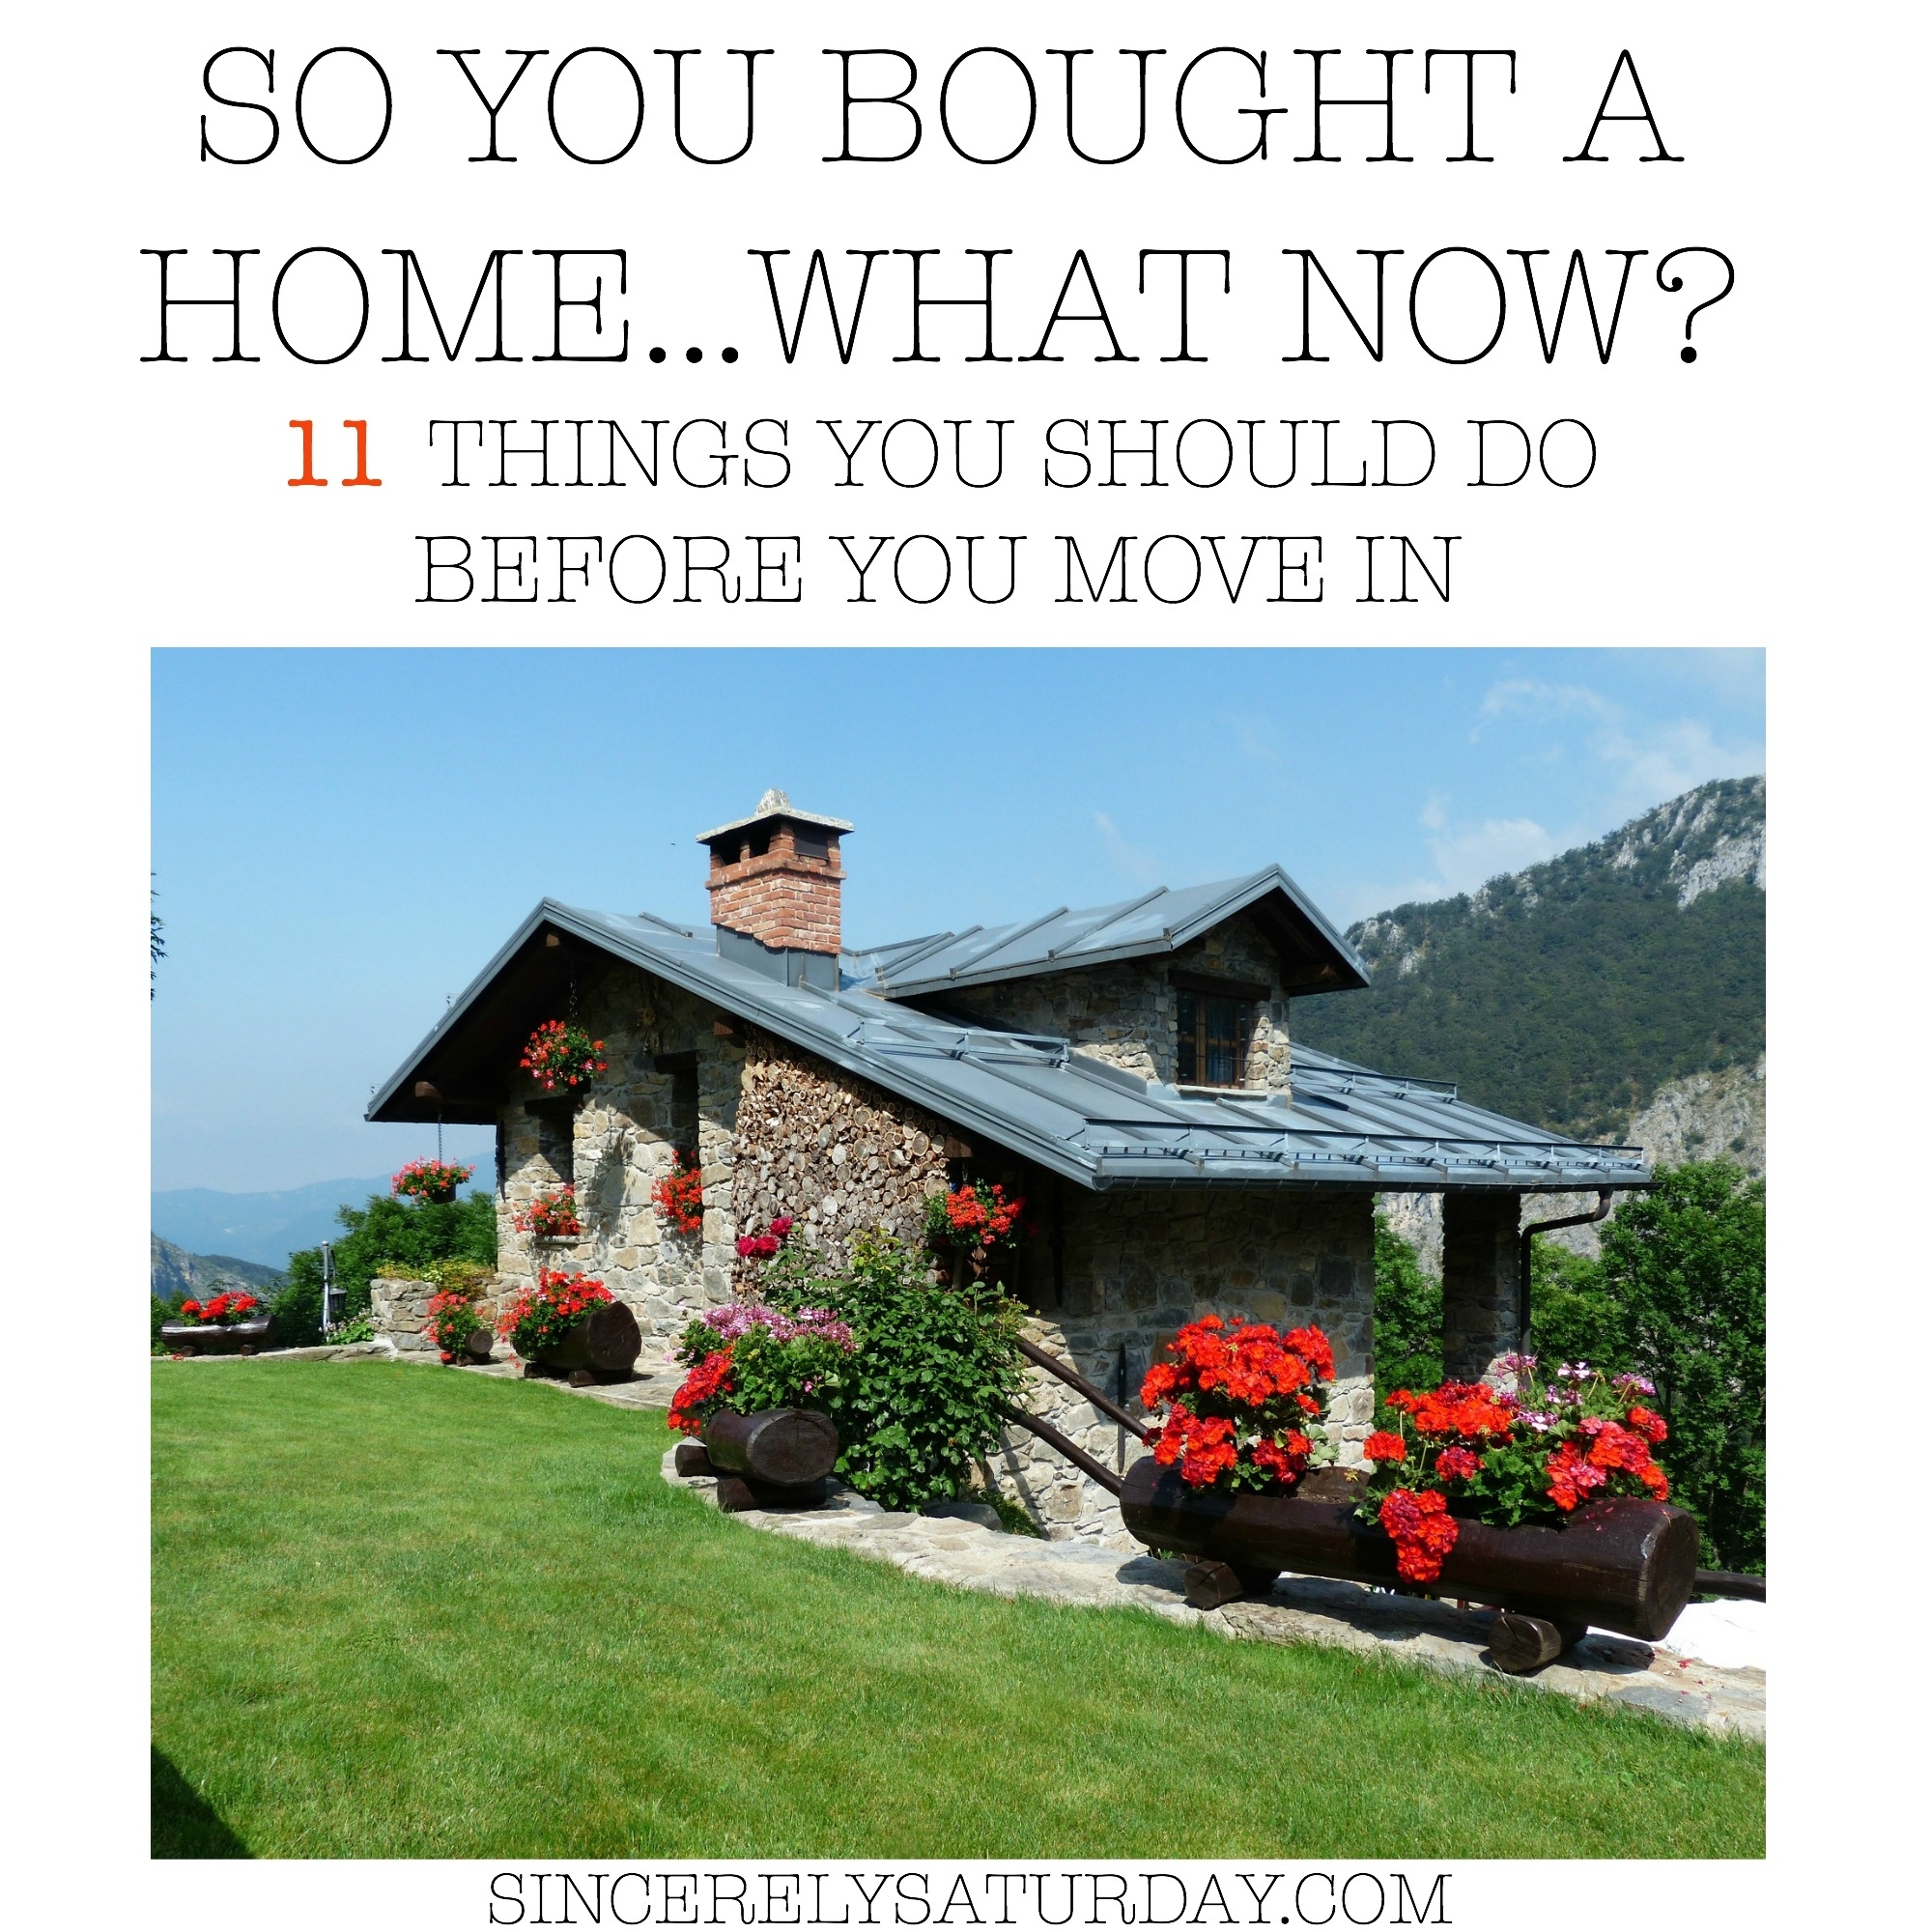 SO YOU BOUGHT A HOMEWHAT NOW? - 11 THINGS YOU SHOULD DO BEFORE YOU MOVE  IN - Sincerely Saturday